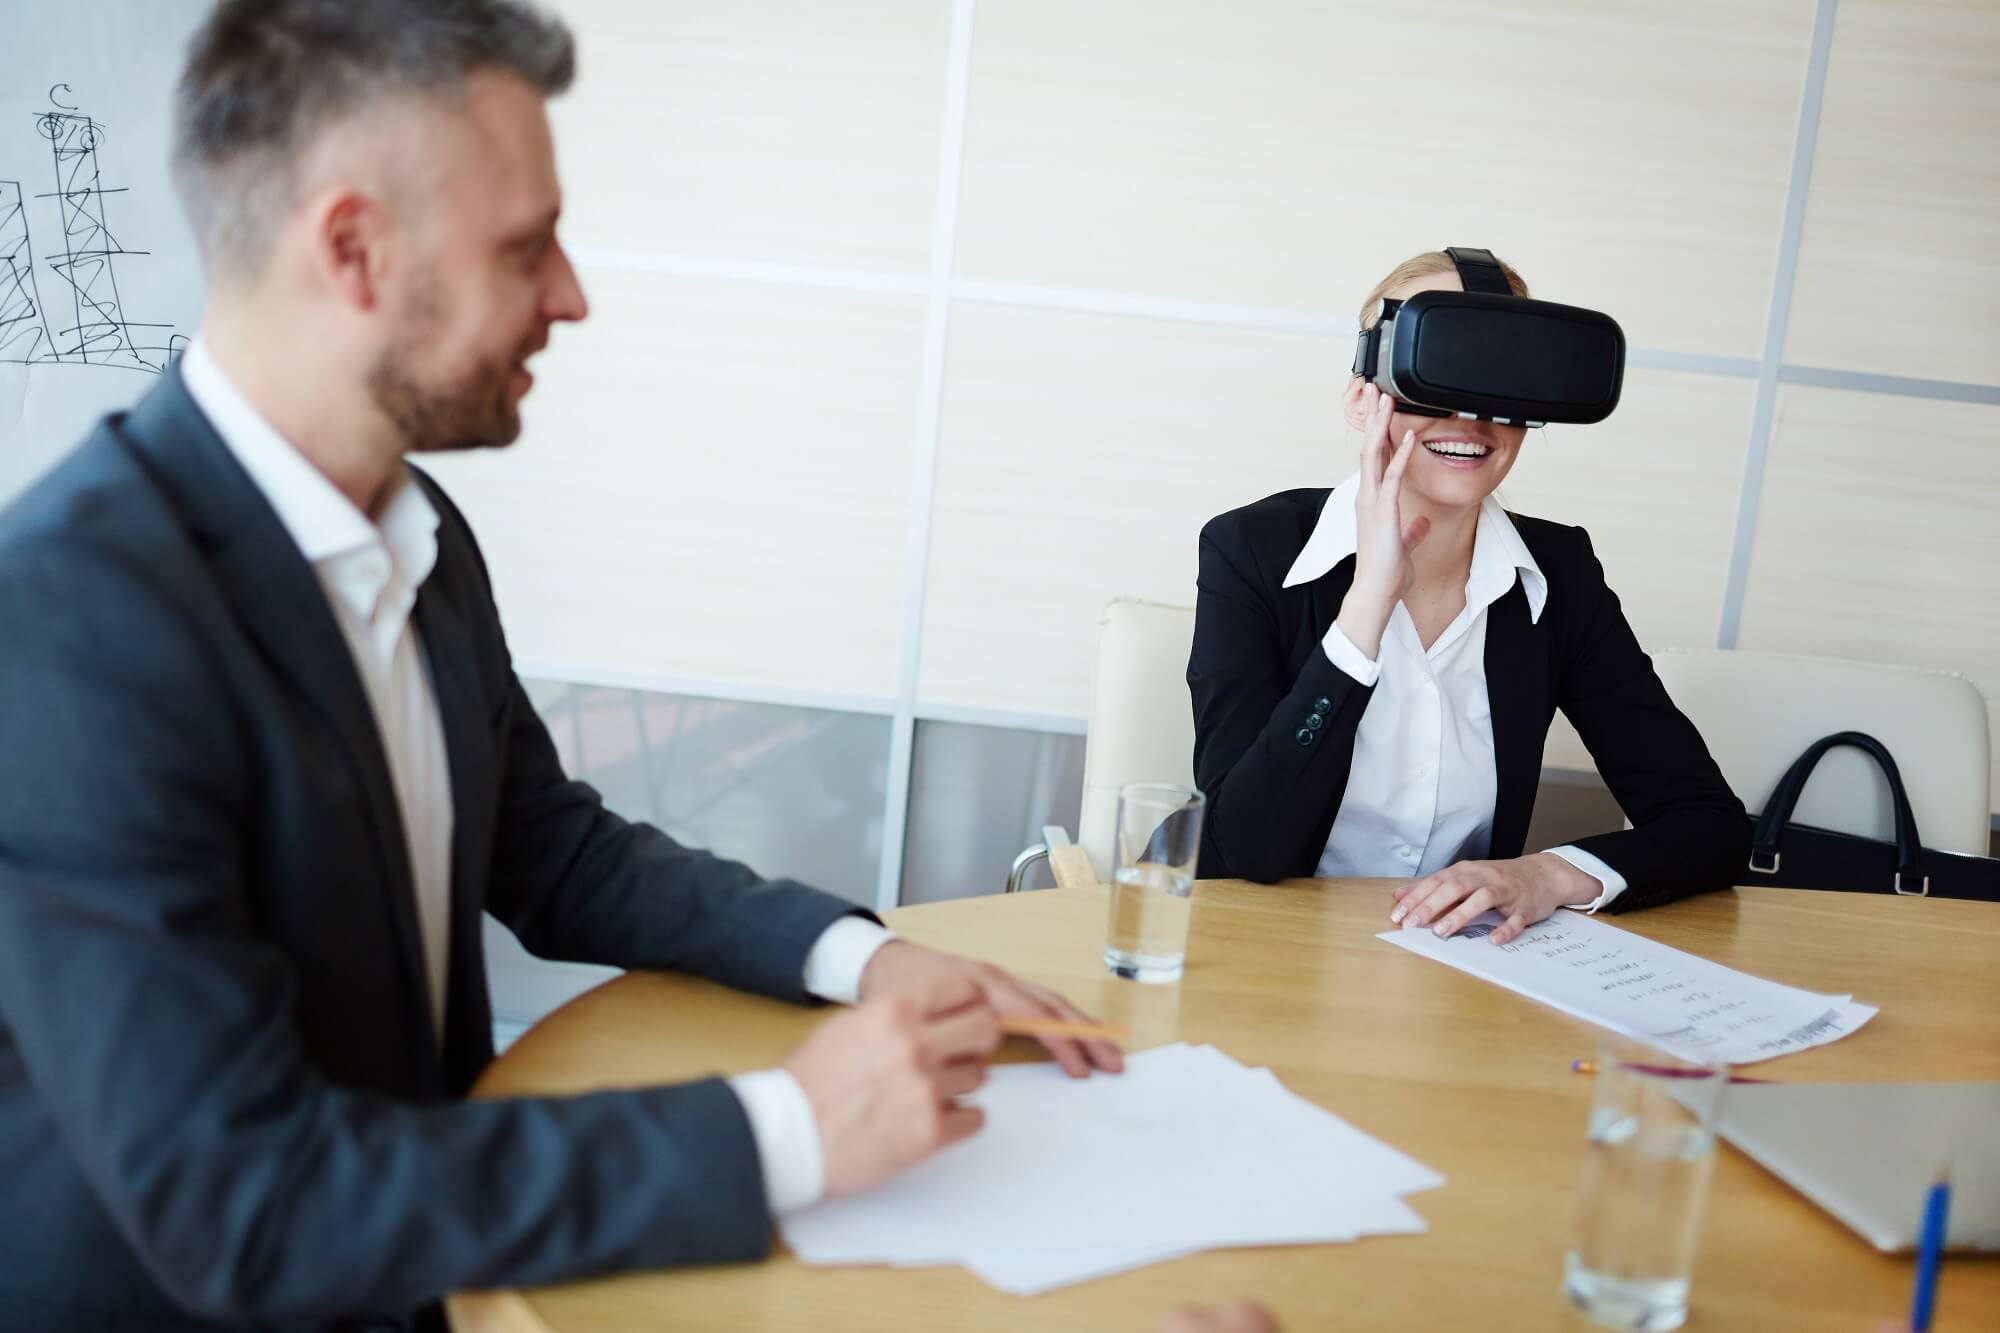 female client looking through corporate event with vr headset and doing virtual event planning